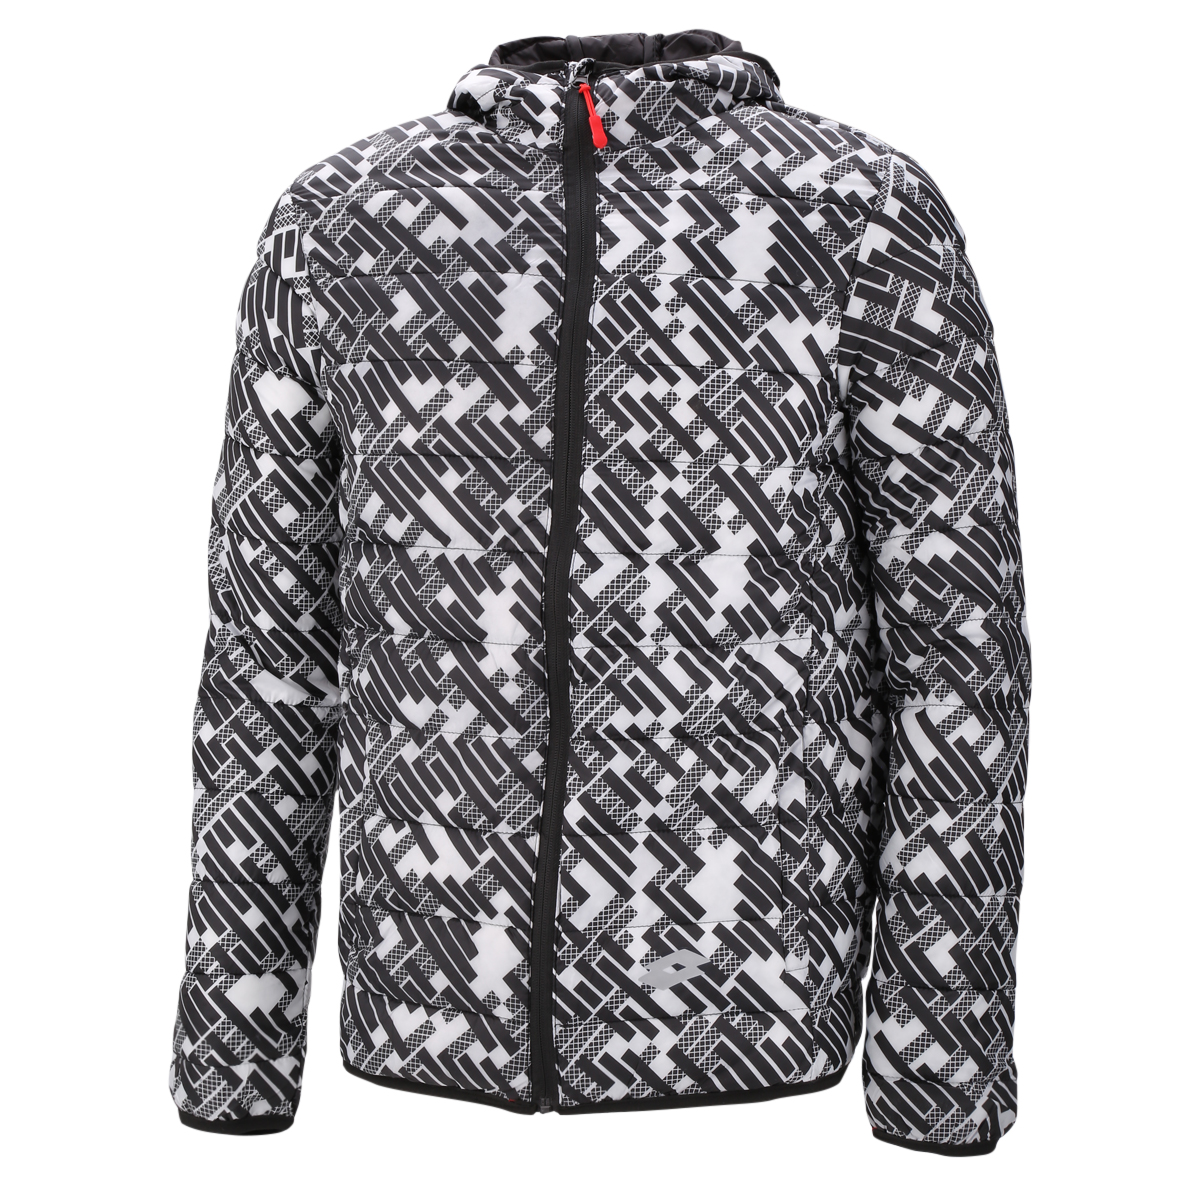 Campera Lotto Print Dinamico,  image number null